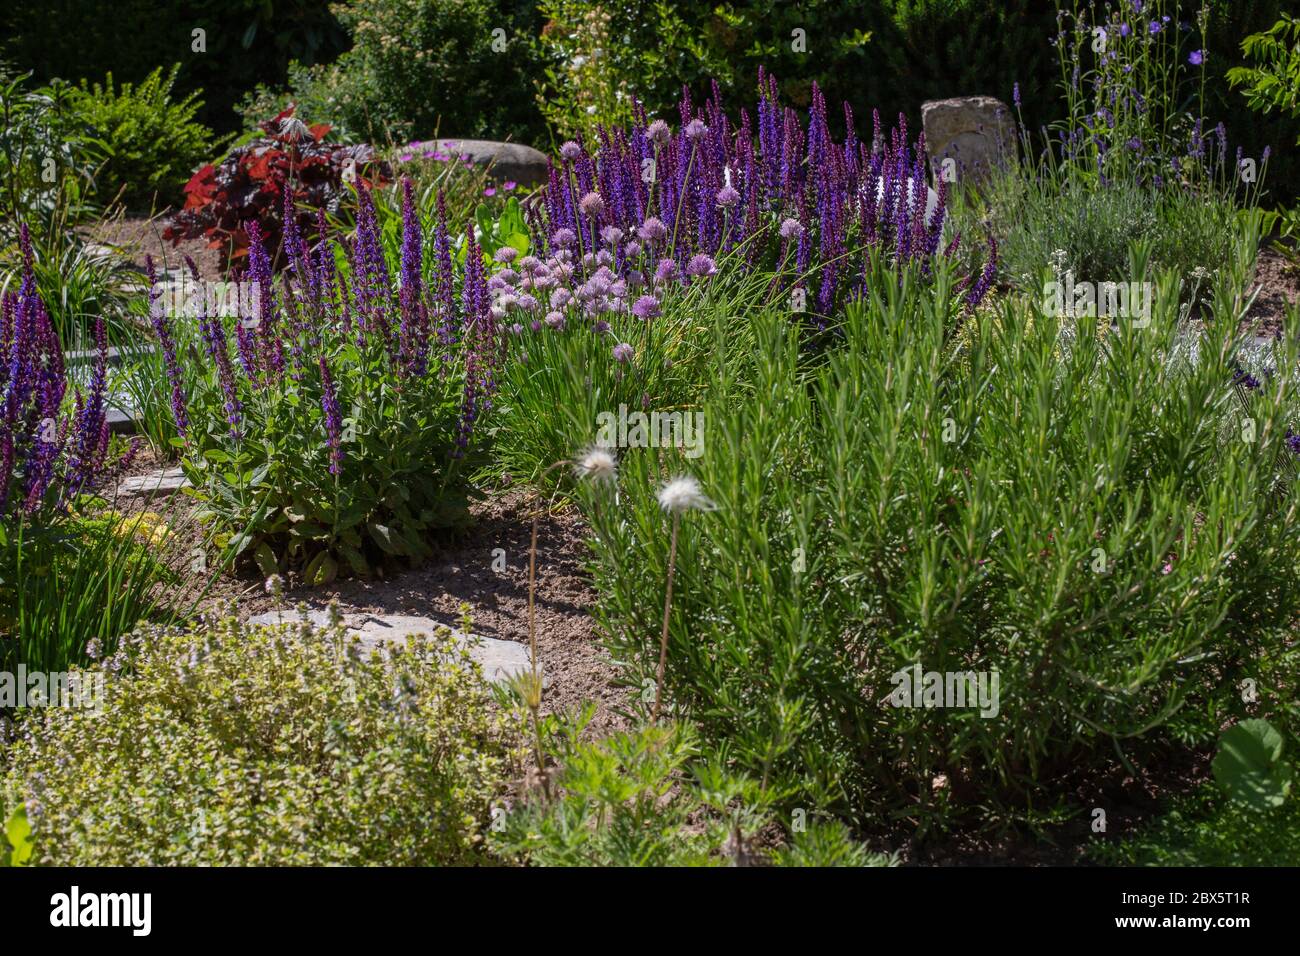 Bed with variety of herbs like chive, rosemary, sage in the summer sun Stock Photo